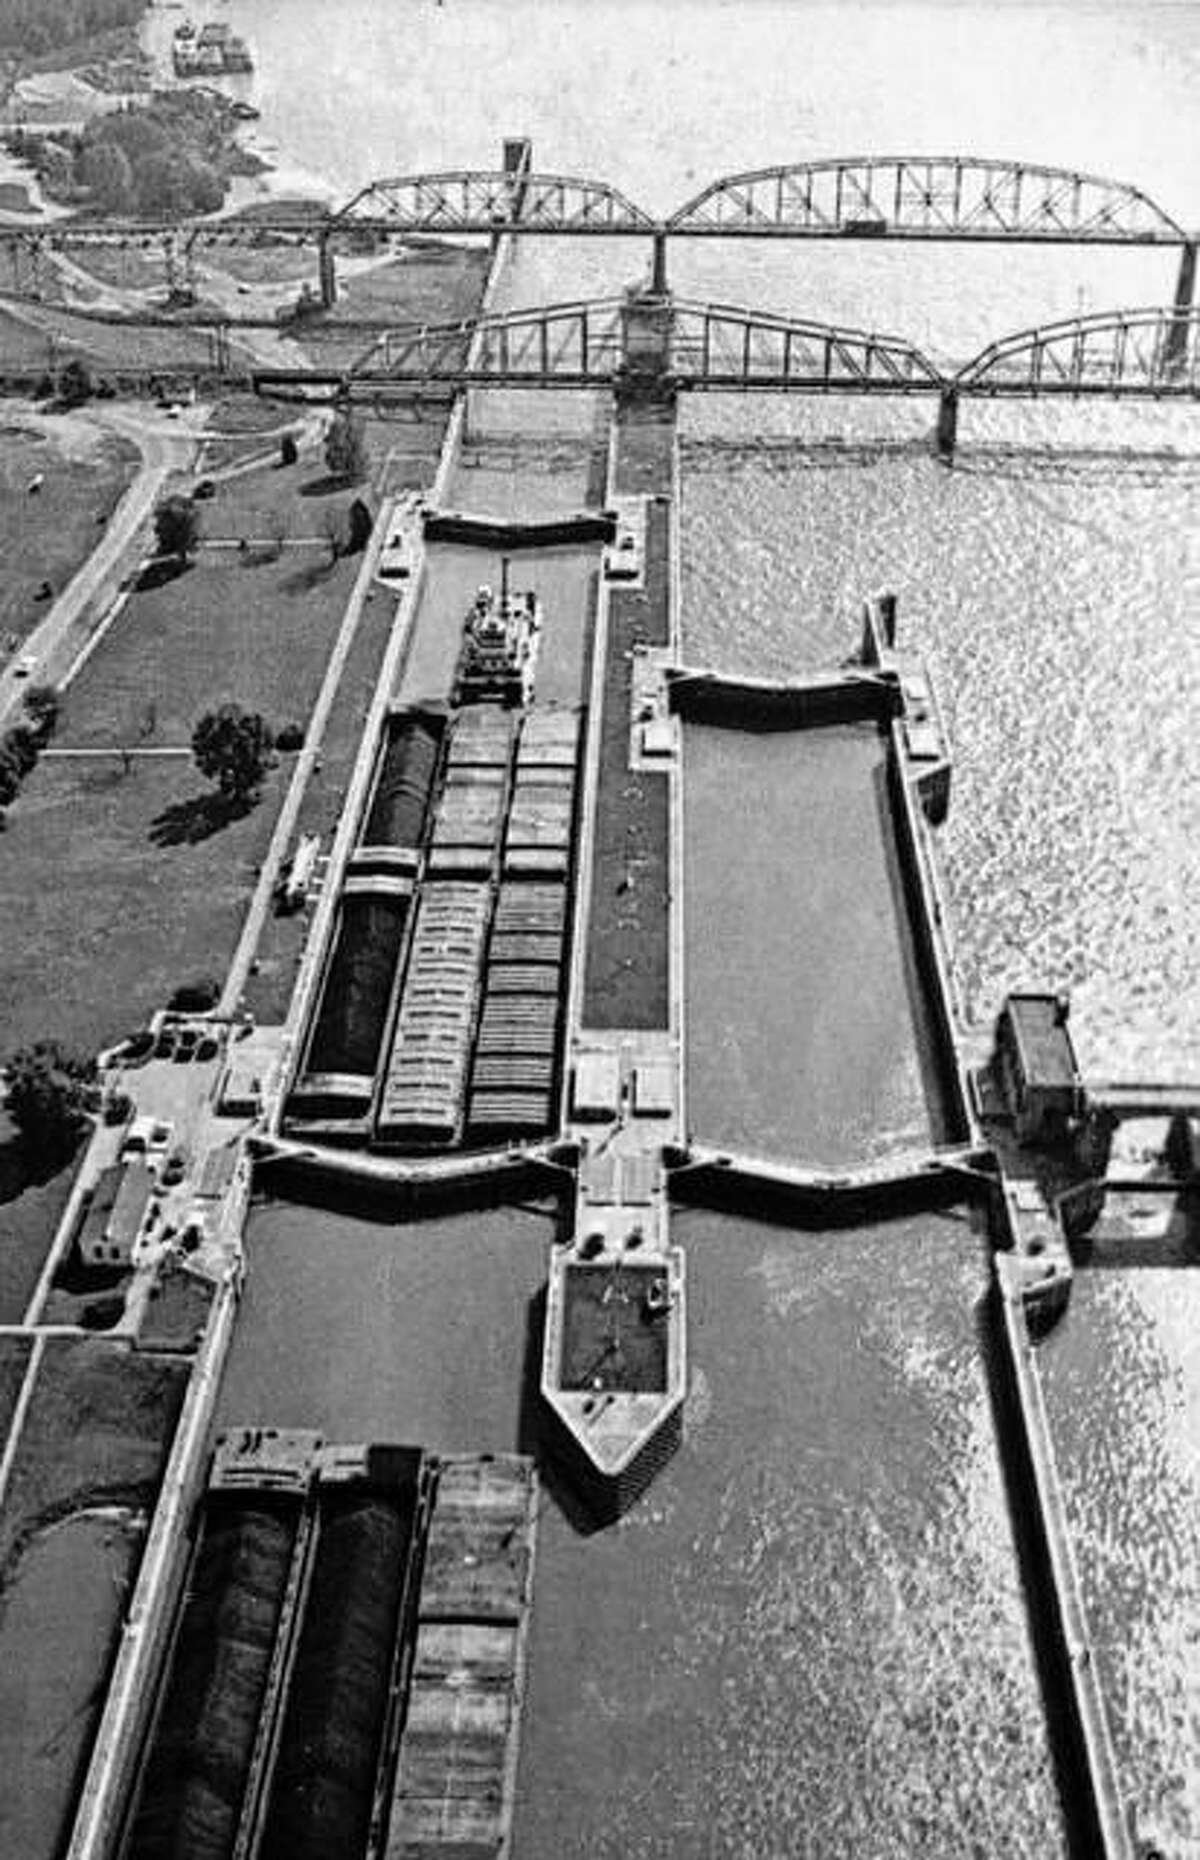 Barges pass through the Locks and Dam 26 at the Alton riverfront. The old Clark Bridge and railroad can also be seen.